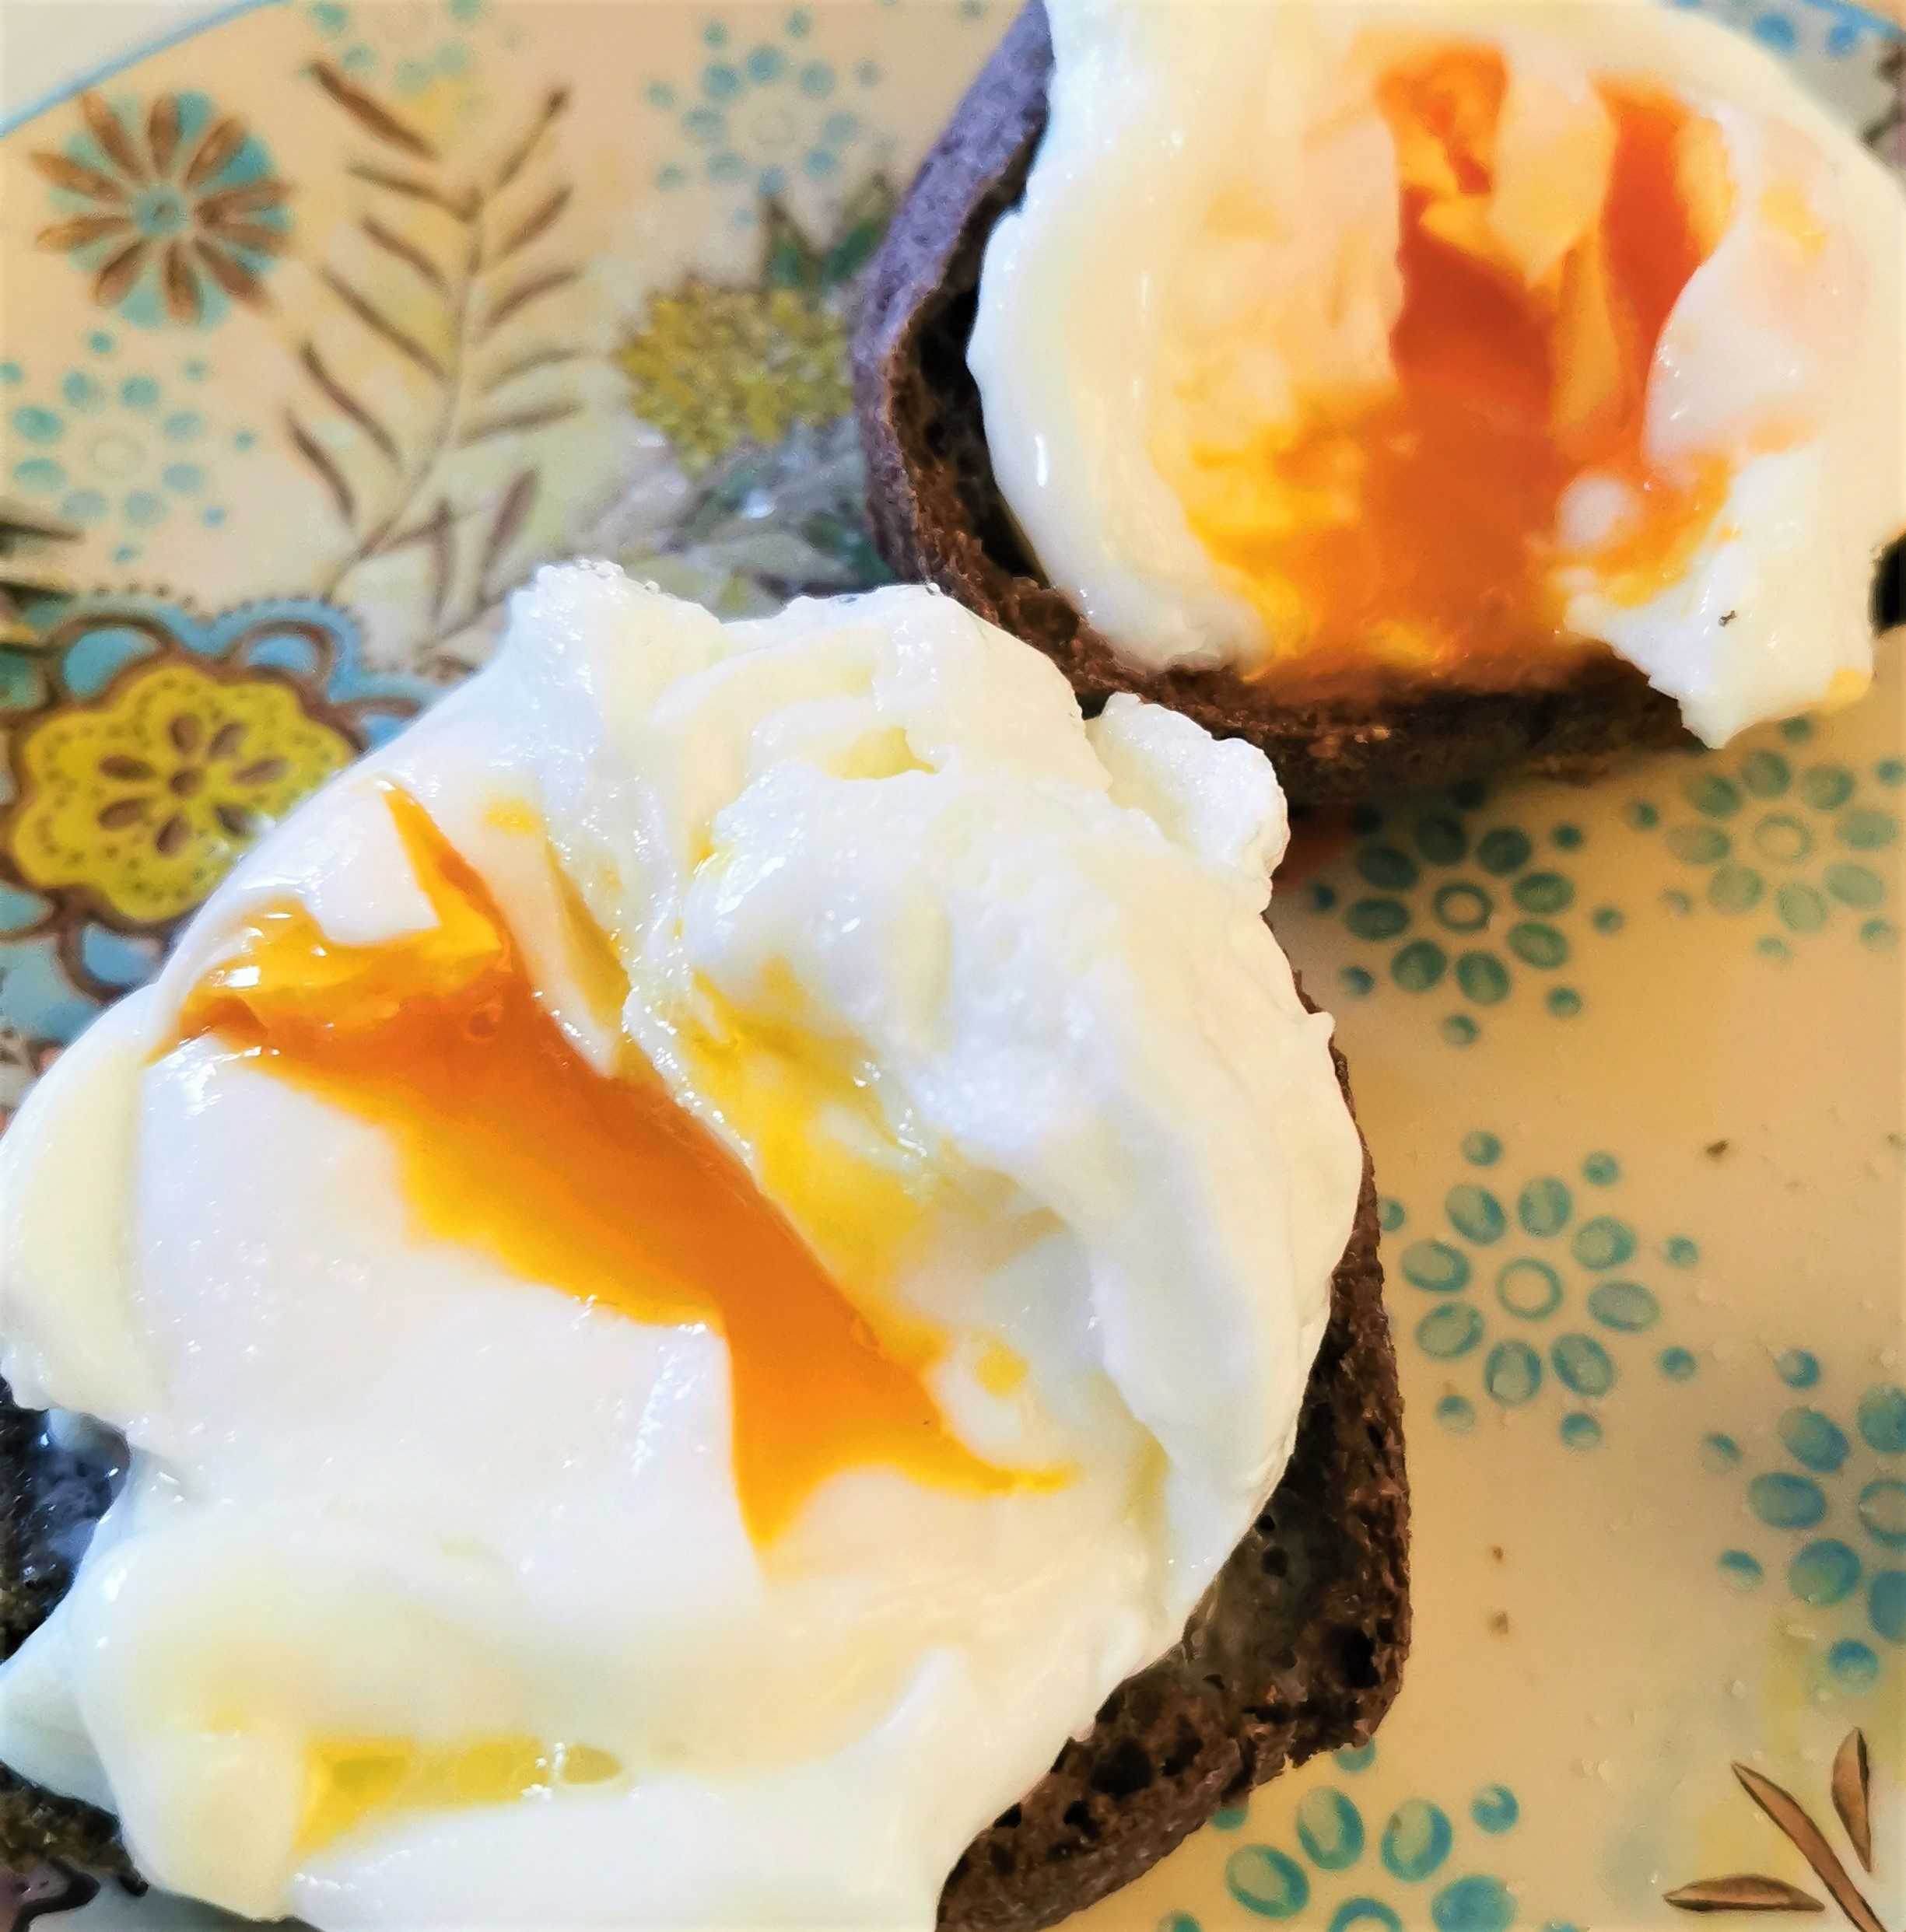 two poached eggs oozing golden yolk on two halves of low carb roll served on a patterned plate